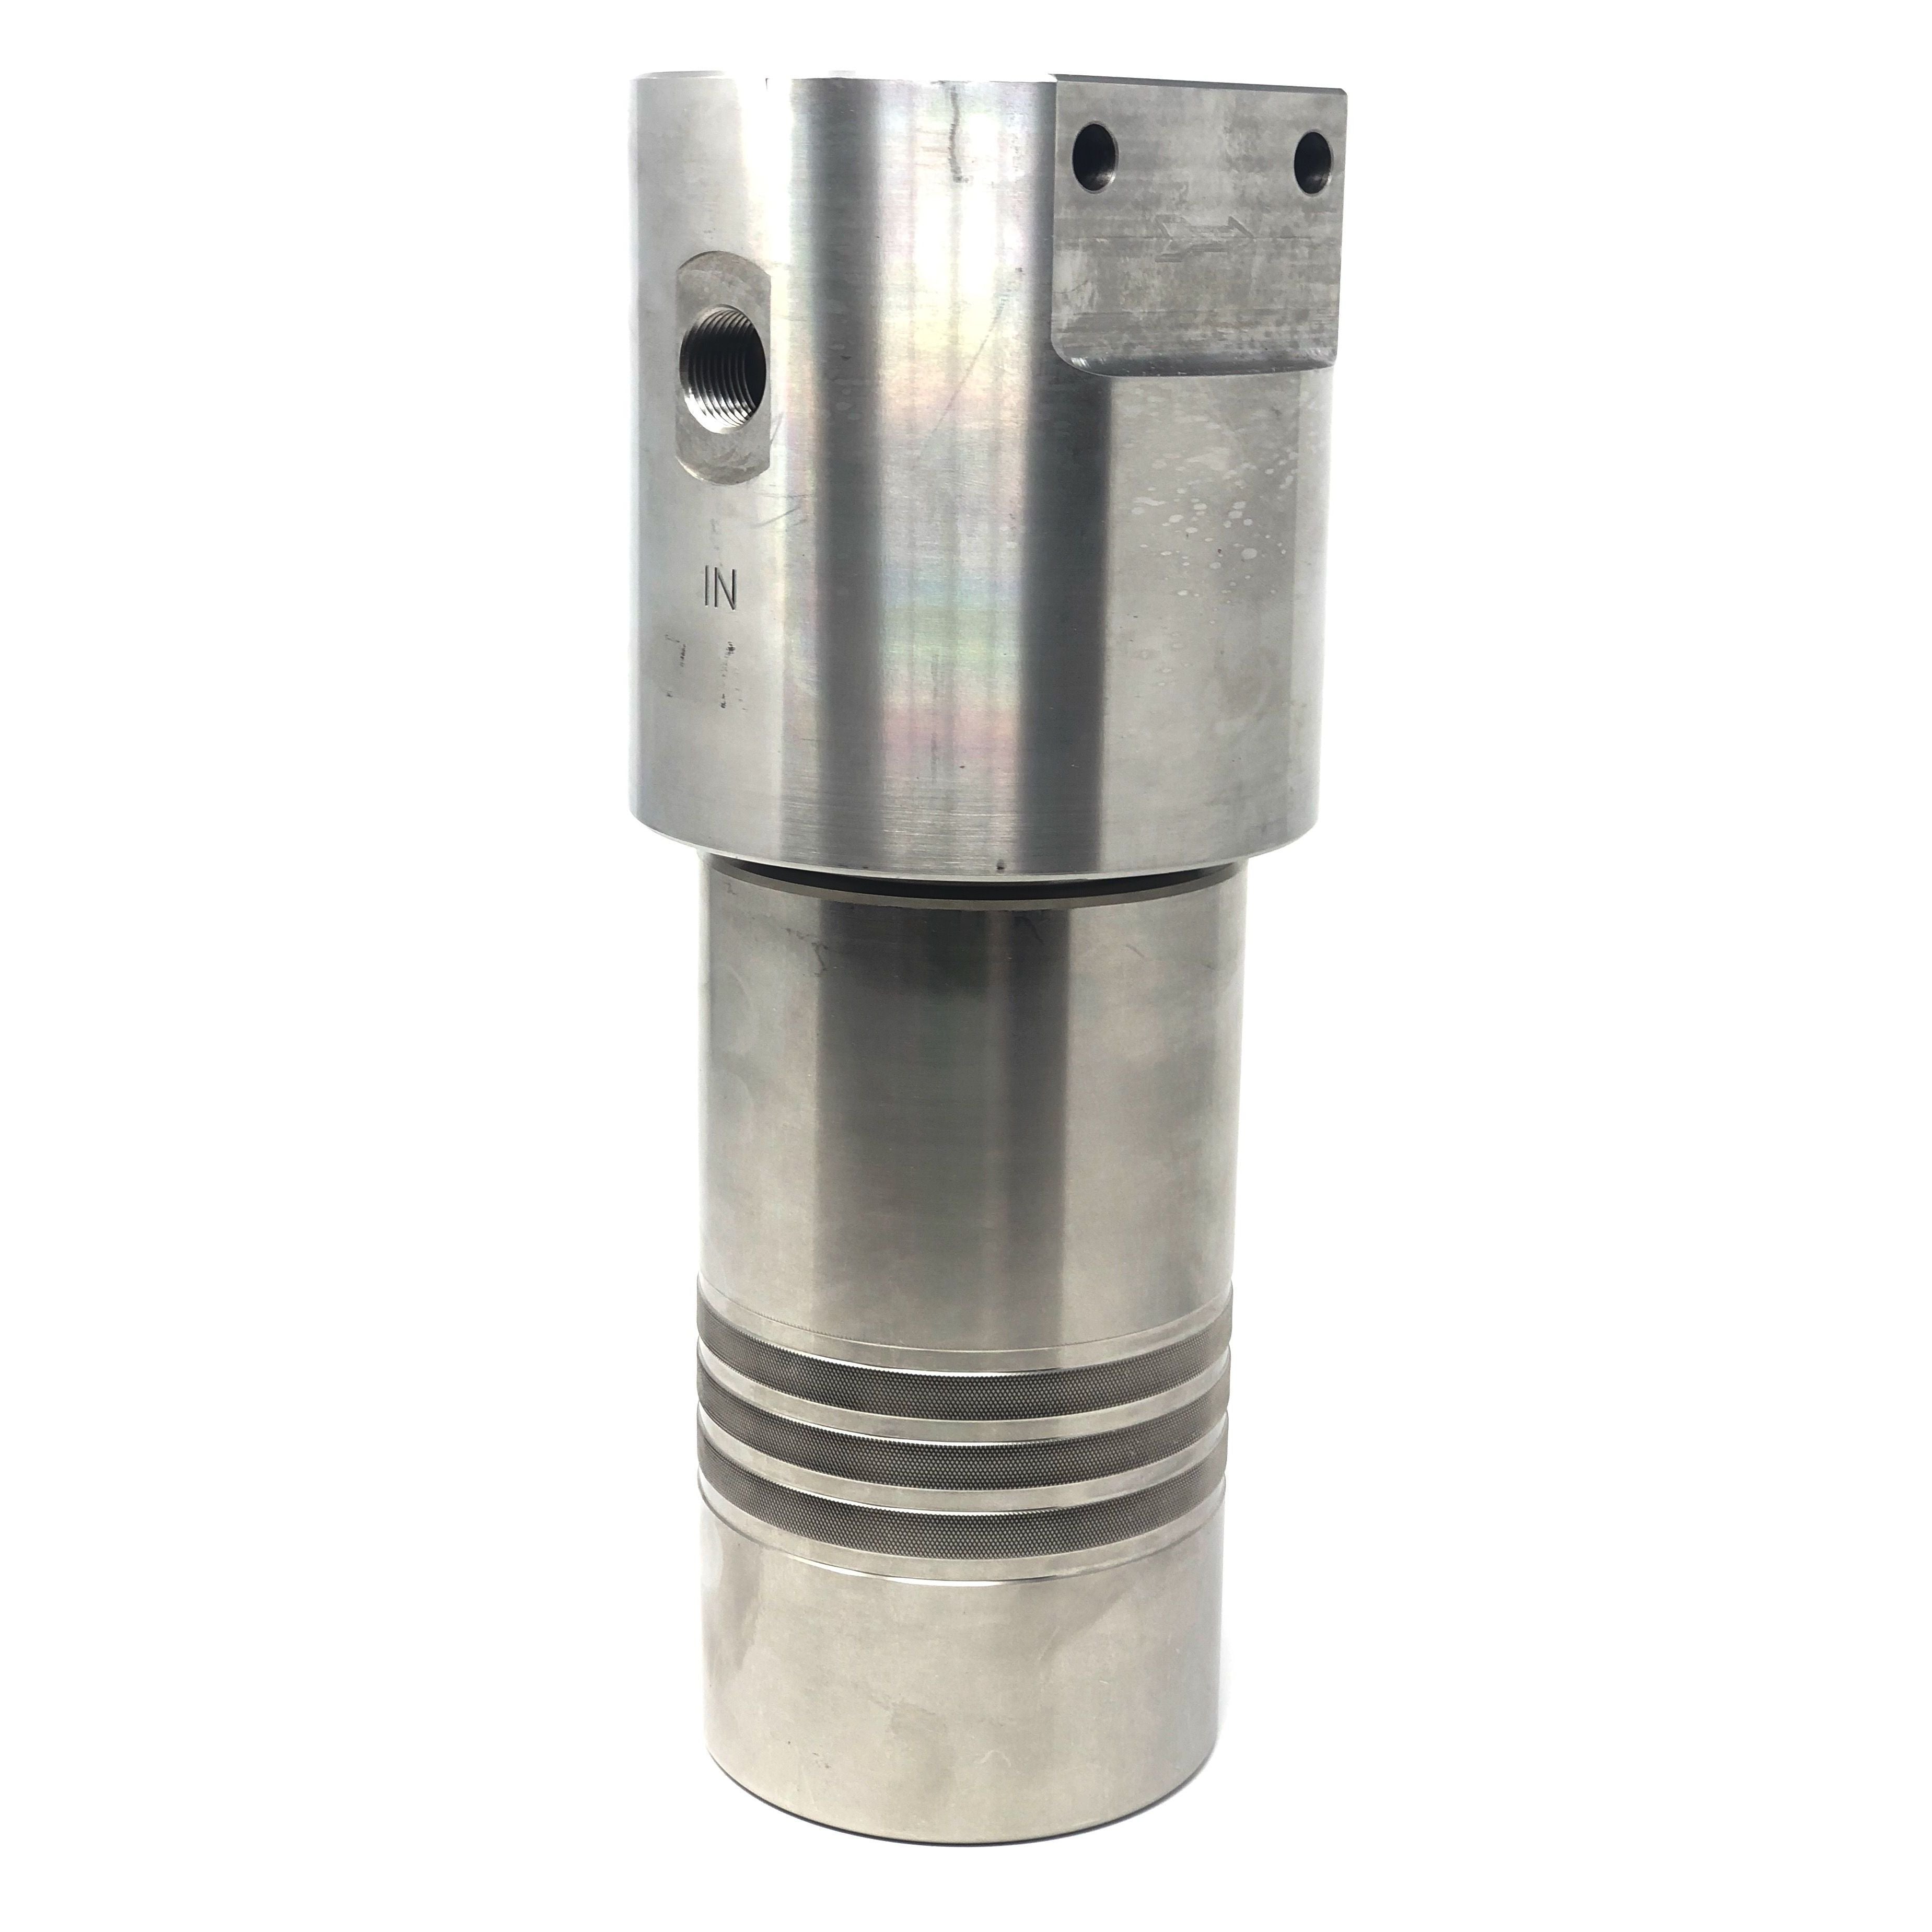 52S-248N-18SEN : Chase Ultra High Pressure Inline Filter, 10000psi, 1/2" NPT, 18 Micron, With Visual Indicator, No Bypass